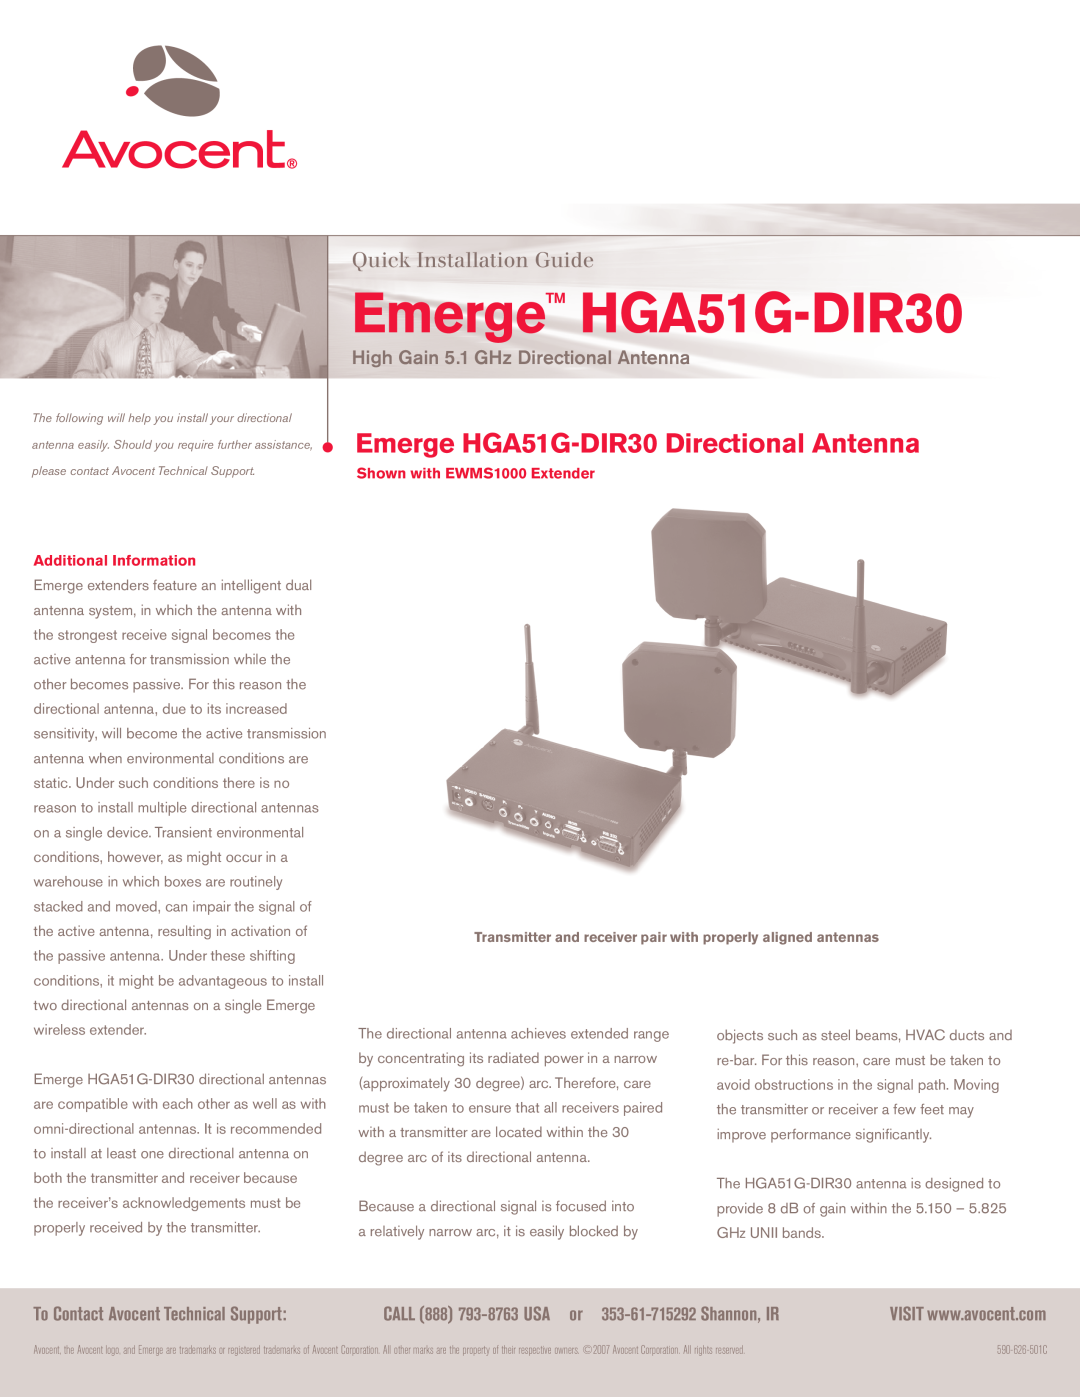 Avocent manual Emerge HGA51G-DIR30Directional Antenna, Additional Information, Quick Installation Guide 